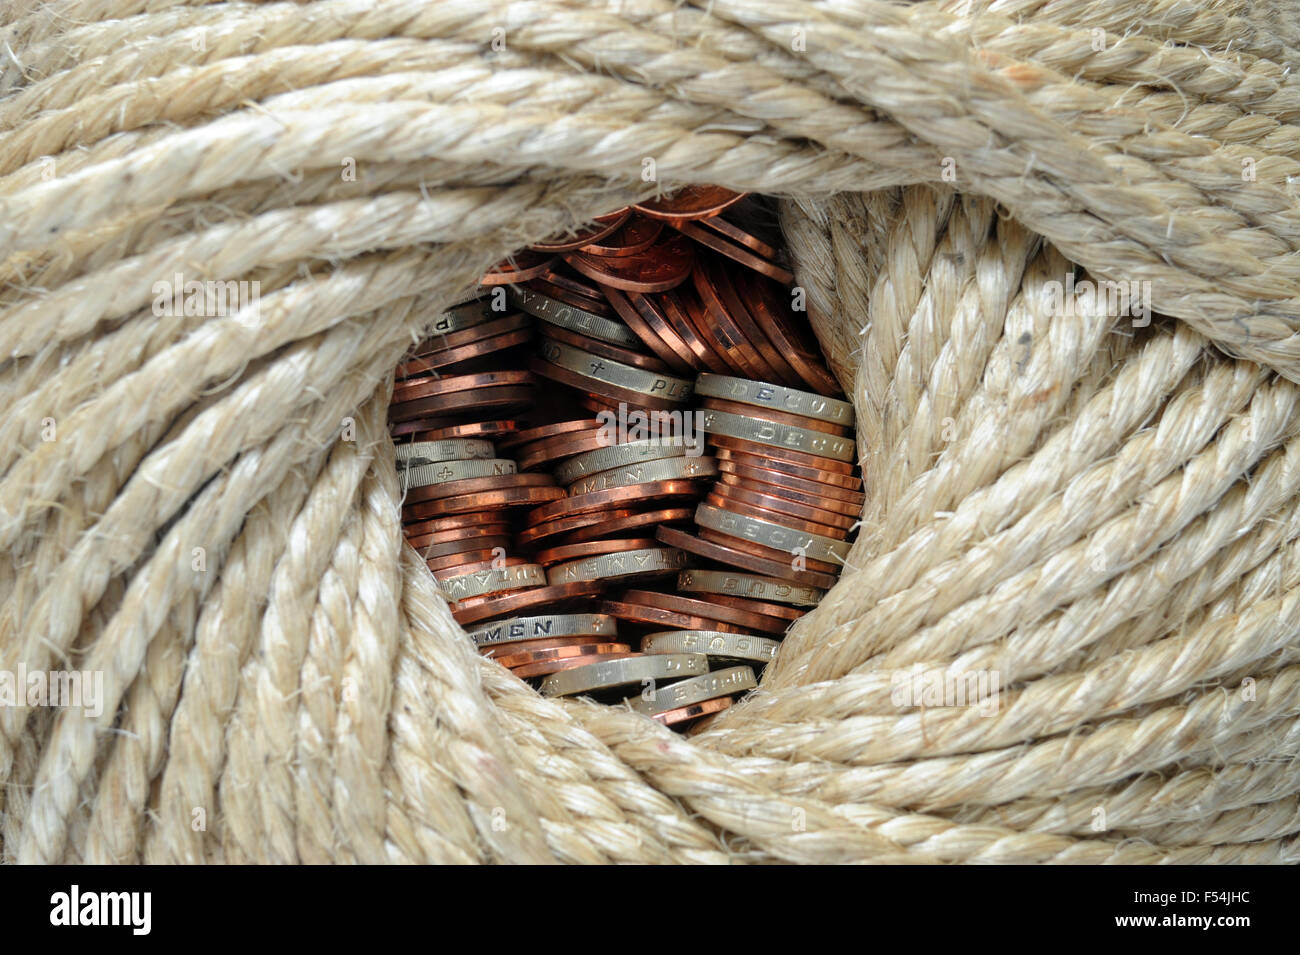 BRITISH COINS WRAPPED IN ROPE RE SAVINGS INCOMES PENSIONS RETIREMENT OLD AGE ONE POUND INVESTMENTS BANKS WAGES HOUSEHOLD CASH UK Stock Photo